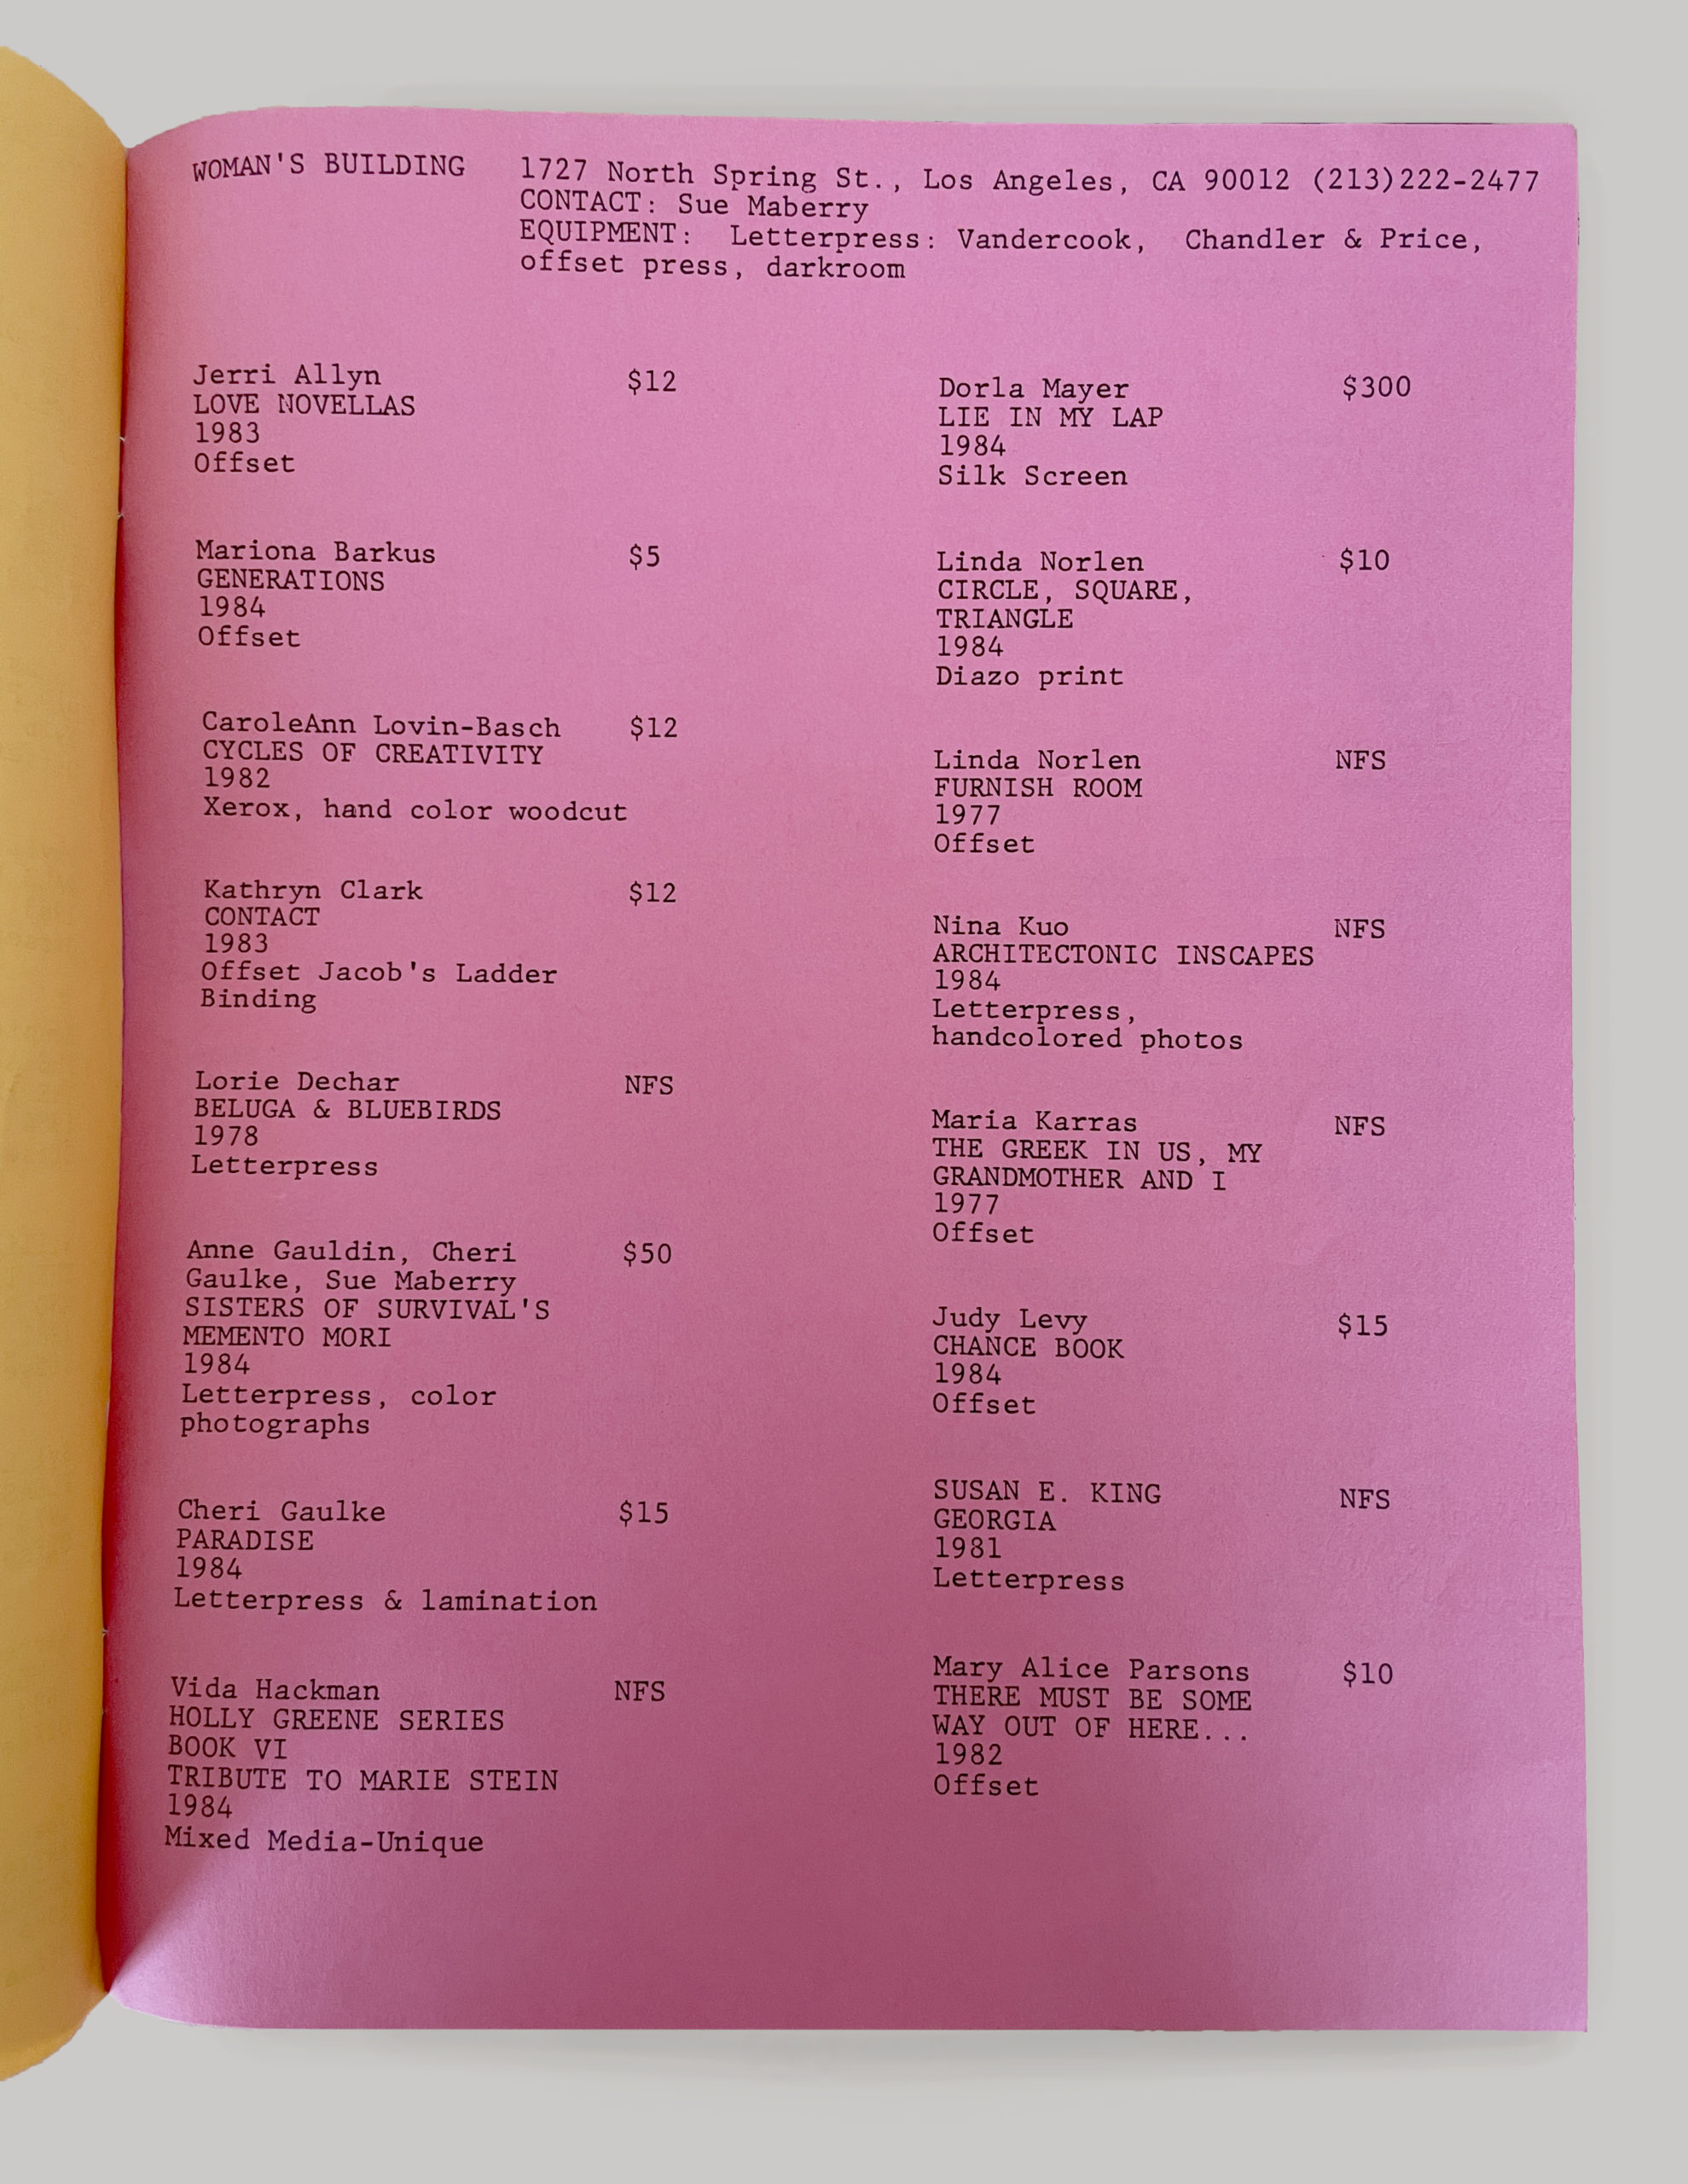 bright pink paper with typewriten checklist of artworks in two columns